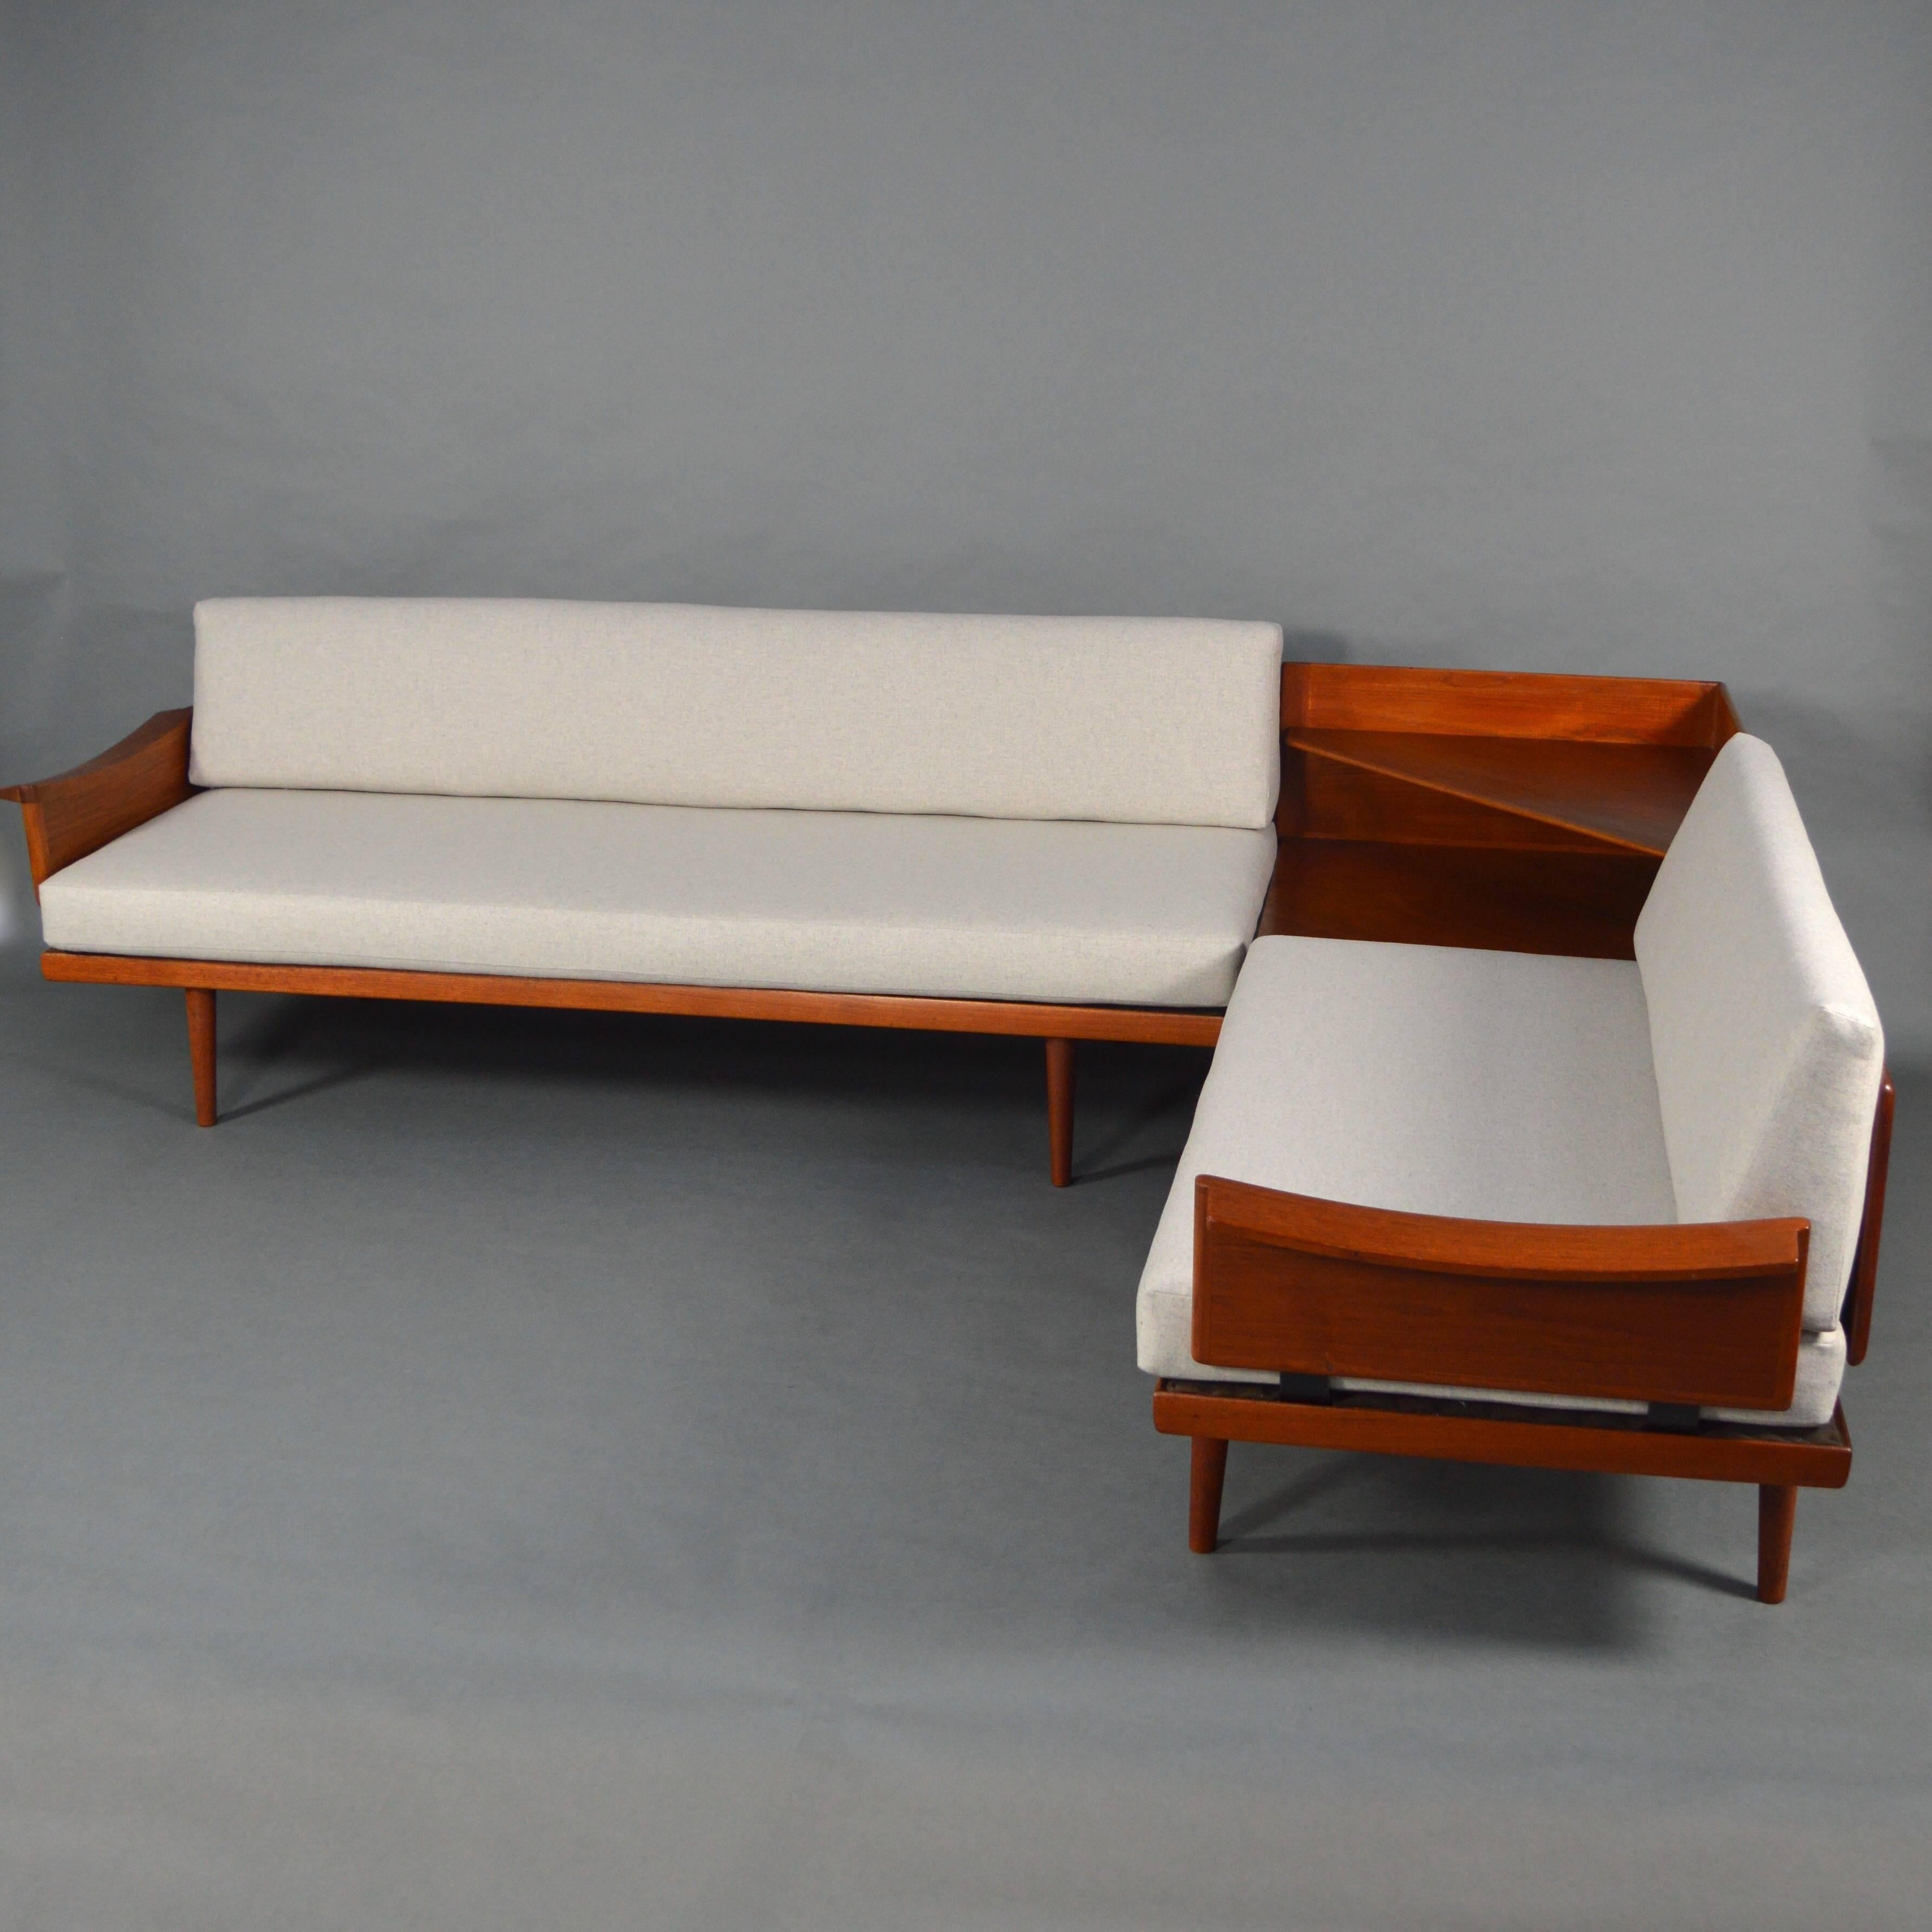 Rare daybed sofa set by Edvard & Tove Kindt larsen for Gustav Bahus, Denmark, 1964.
Made of solid teak and new upholstery in a beautiful light grey mix fabric by Keymer Essential Fabrics.
The armrests can be left or right on the sofa's to create a